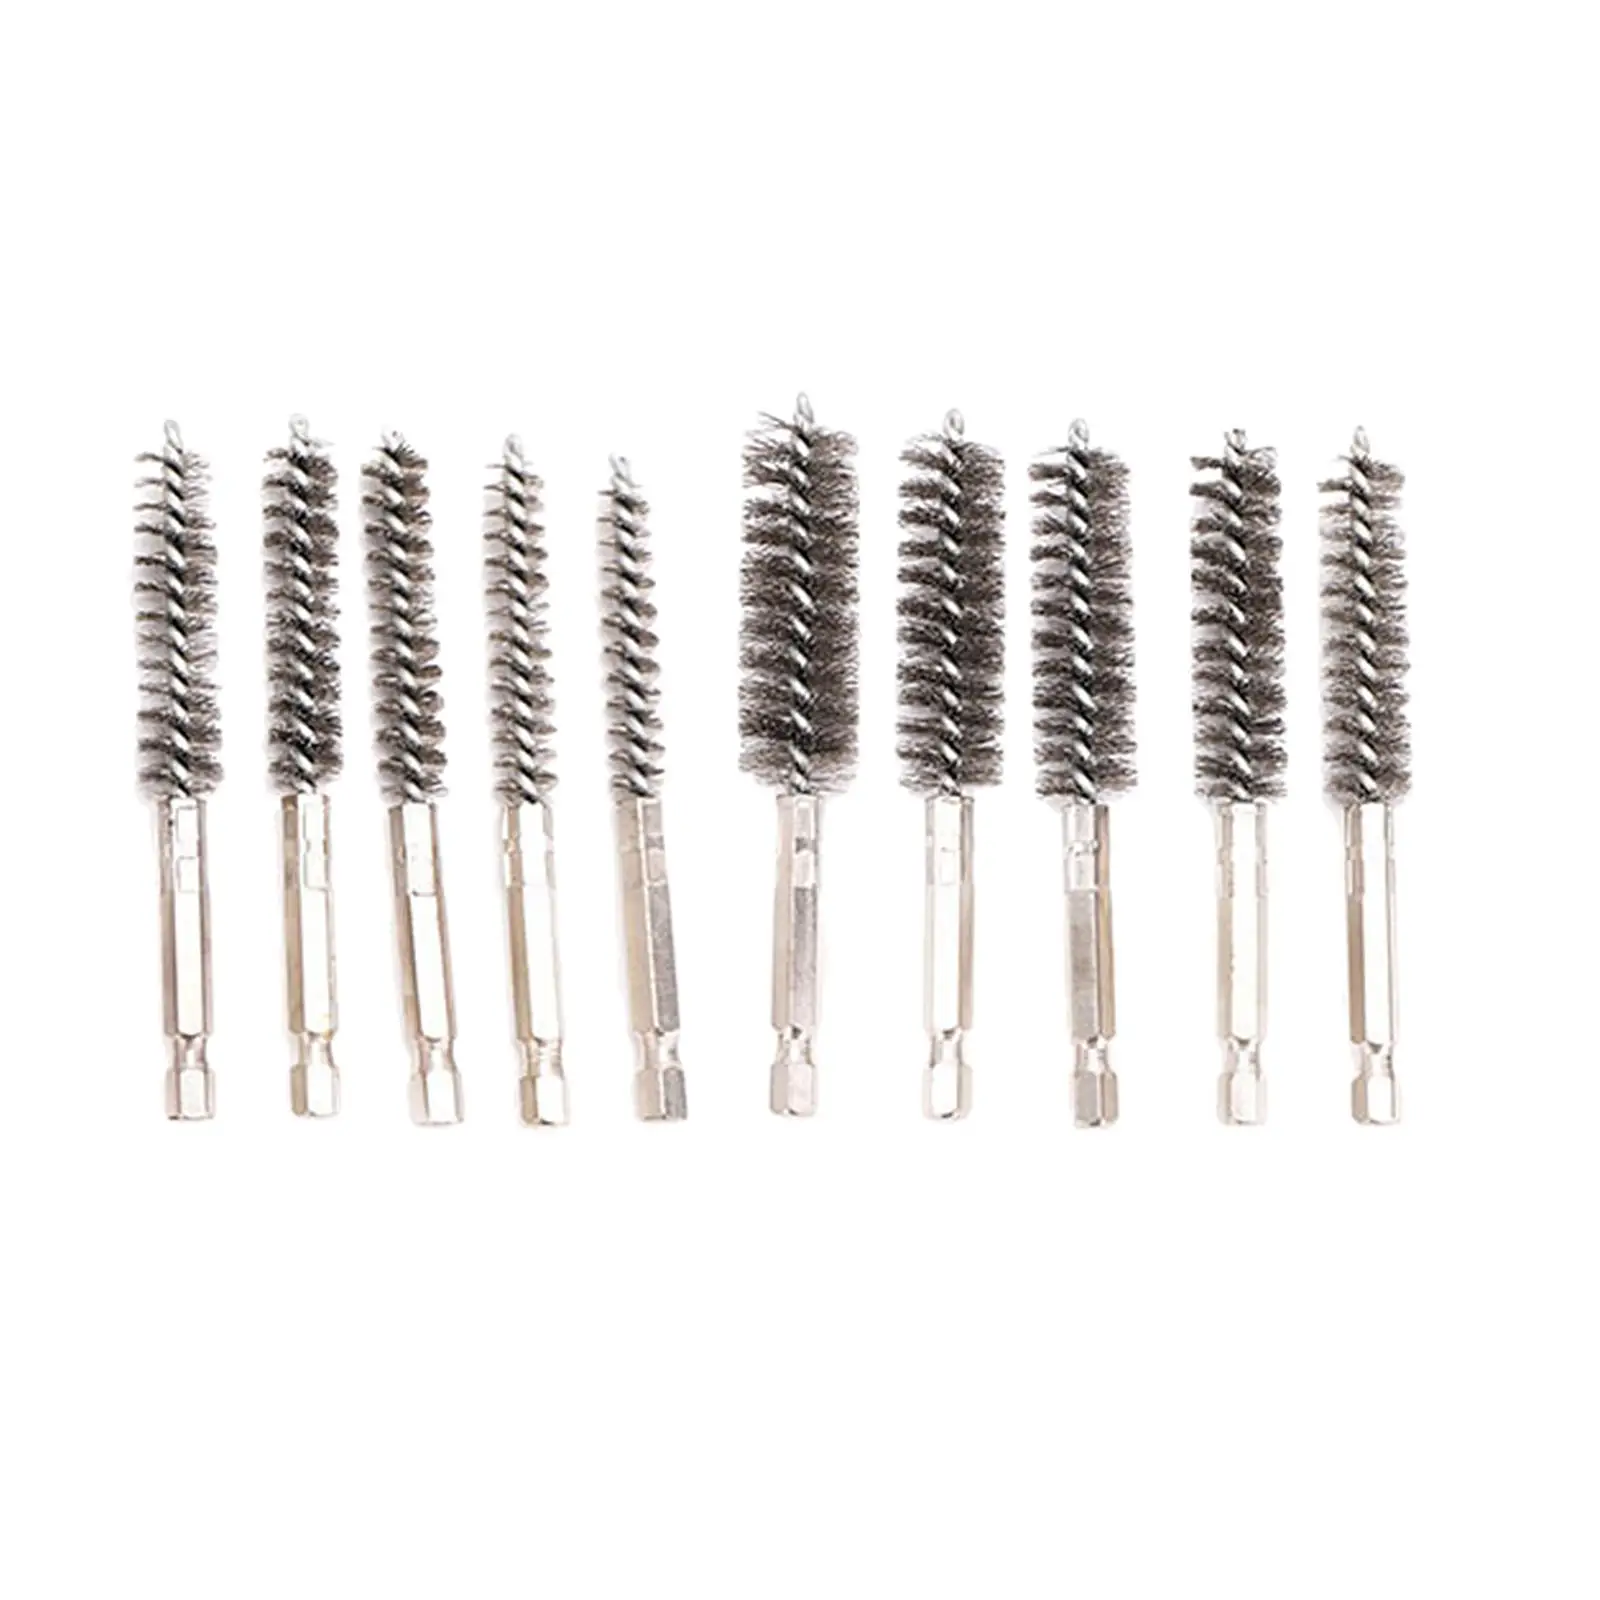 10 Pieces Bore Cleaning Brush Rust Cleaner Assorted bits Brush for Machining Fabrication Cleaning Ports Automotive